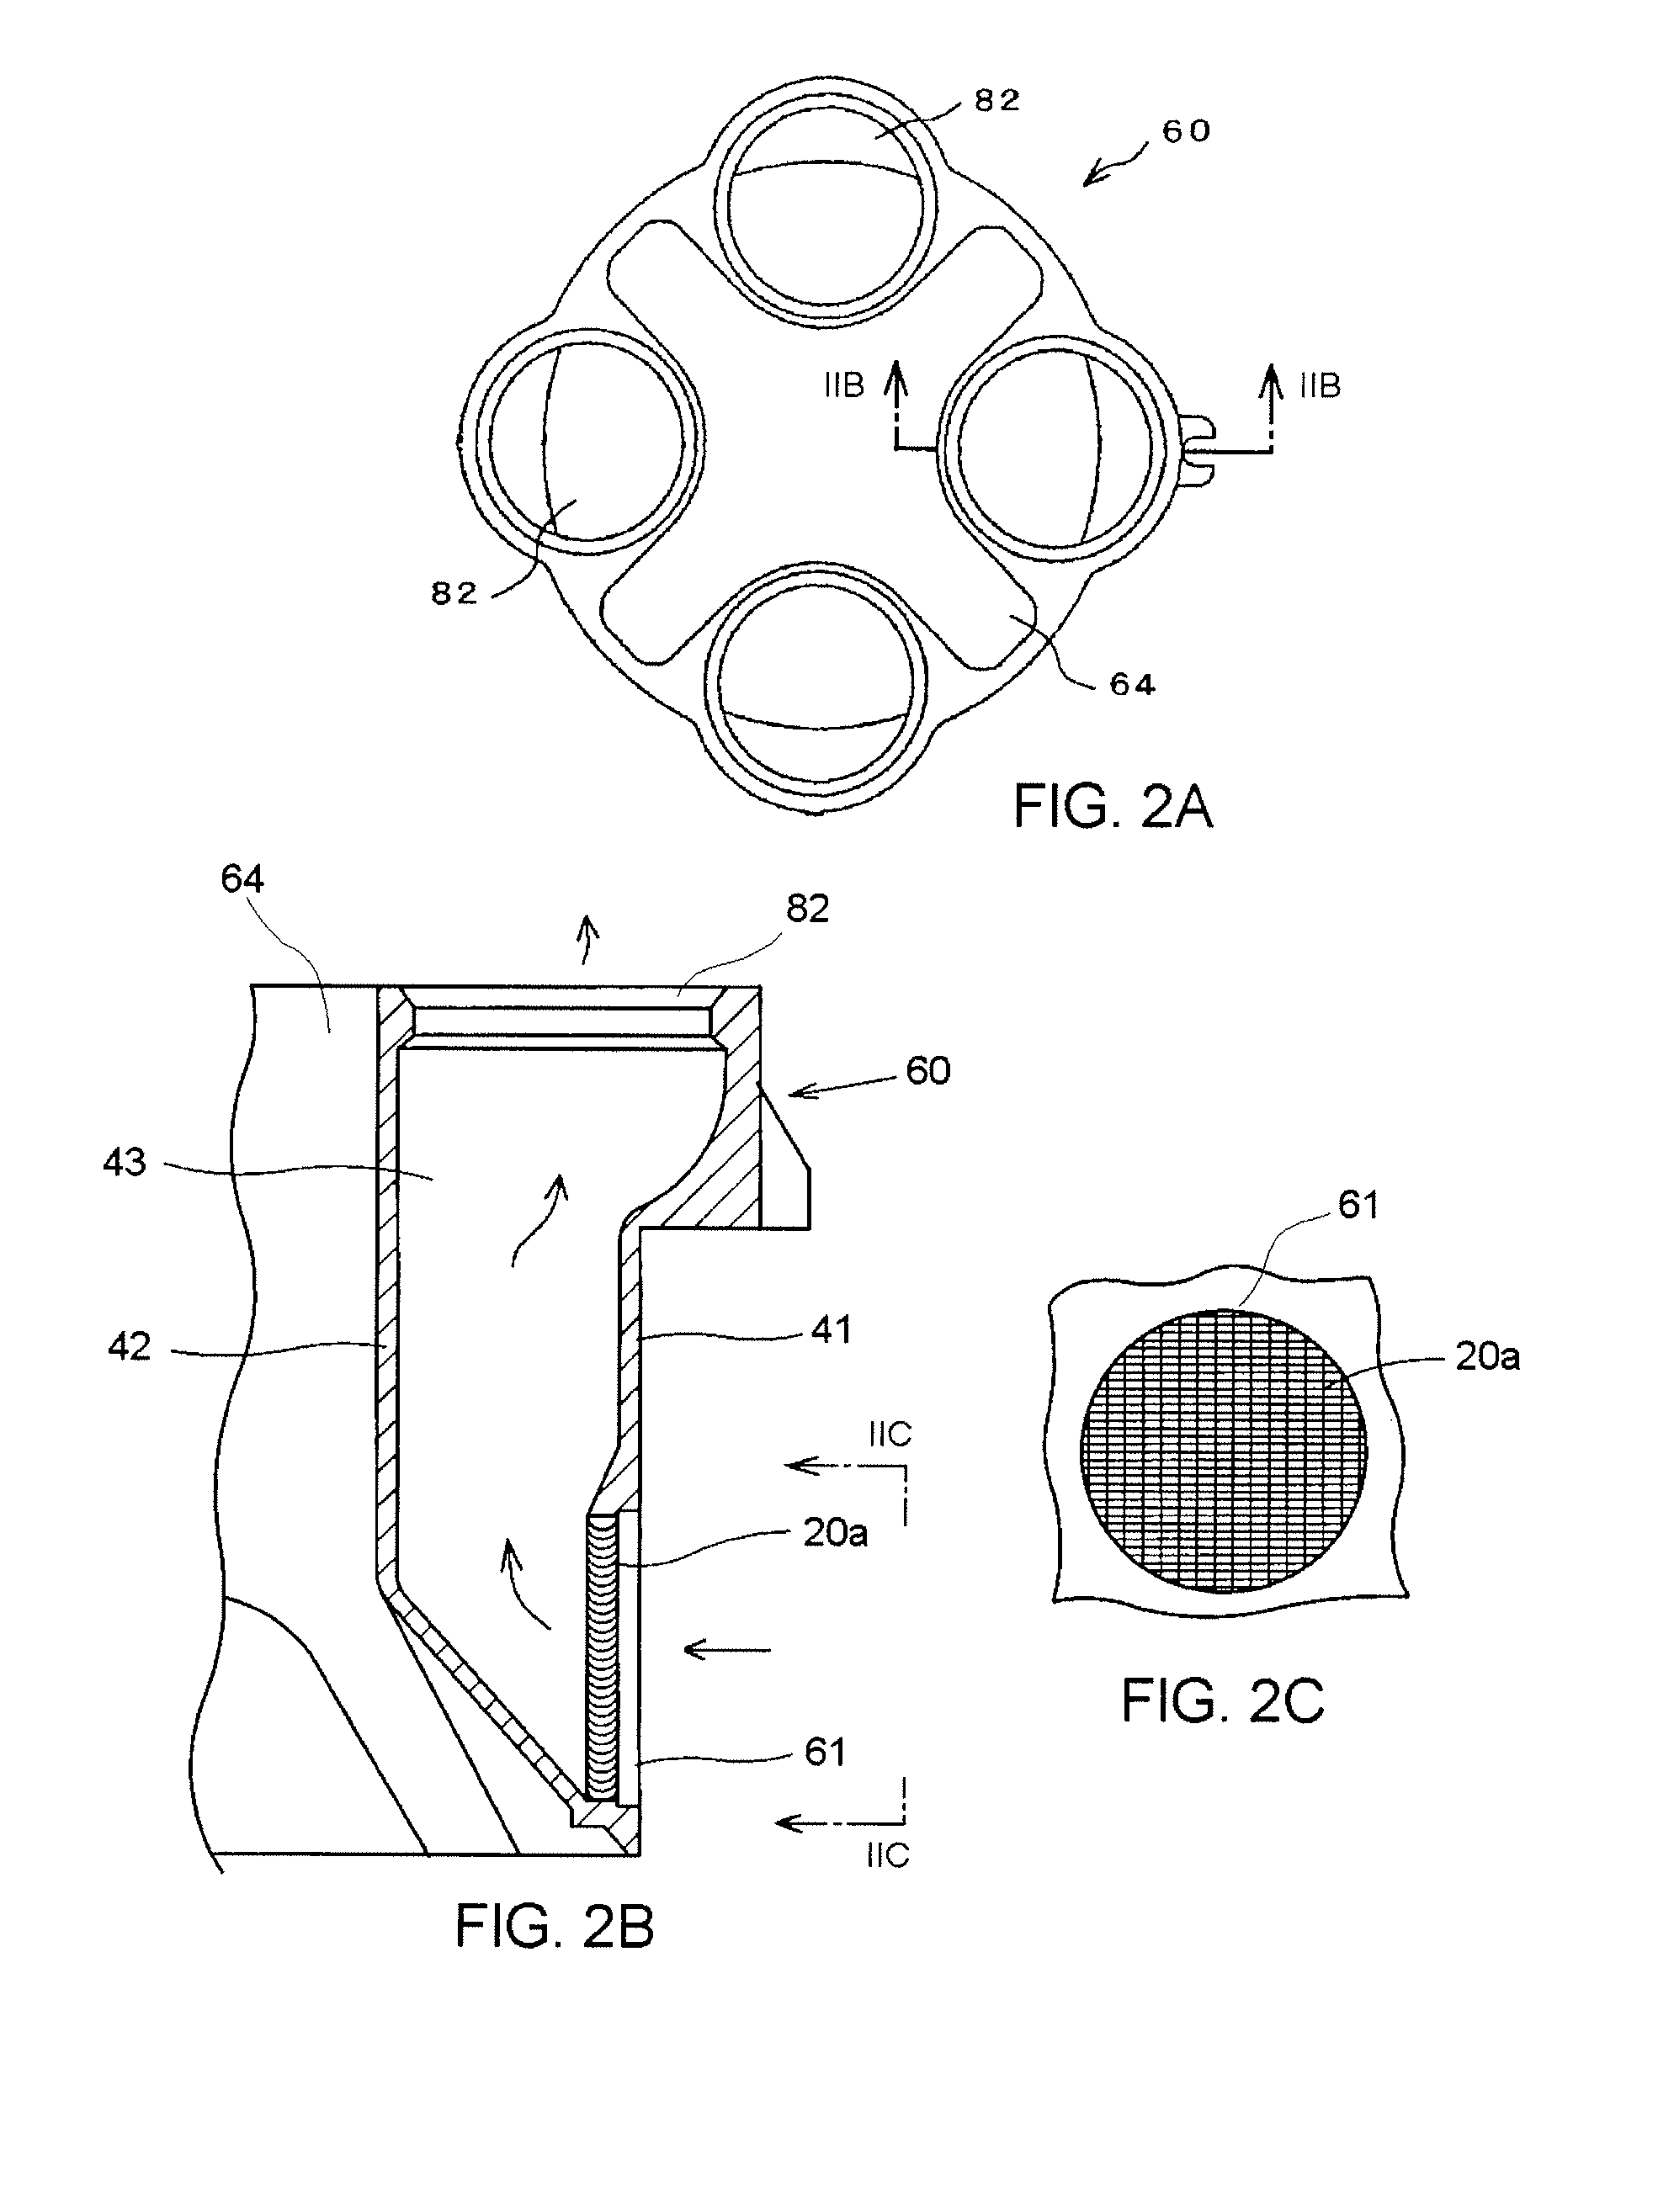 Fuel supporting attachment and fuel inlet mechanism